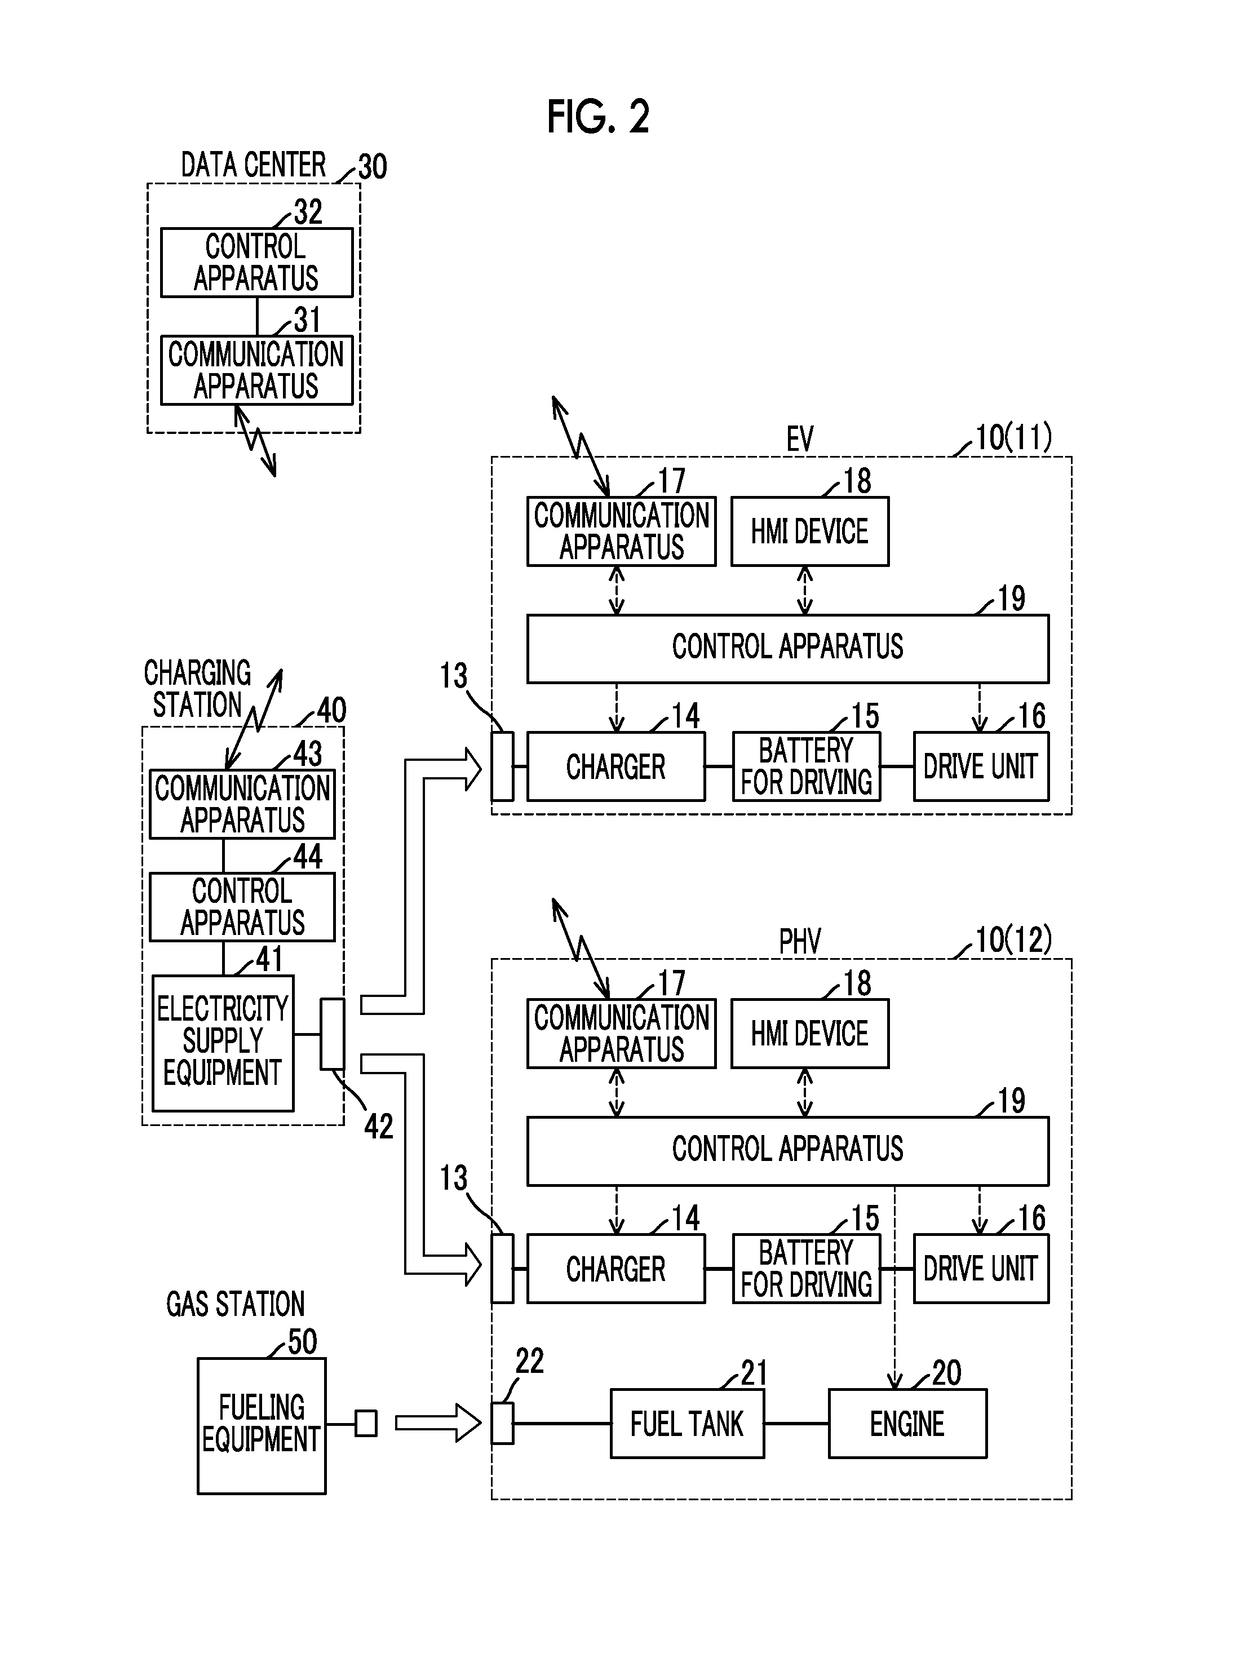 Charging system for electrically driven vehicles